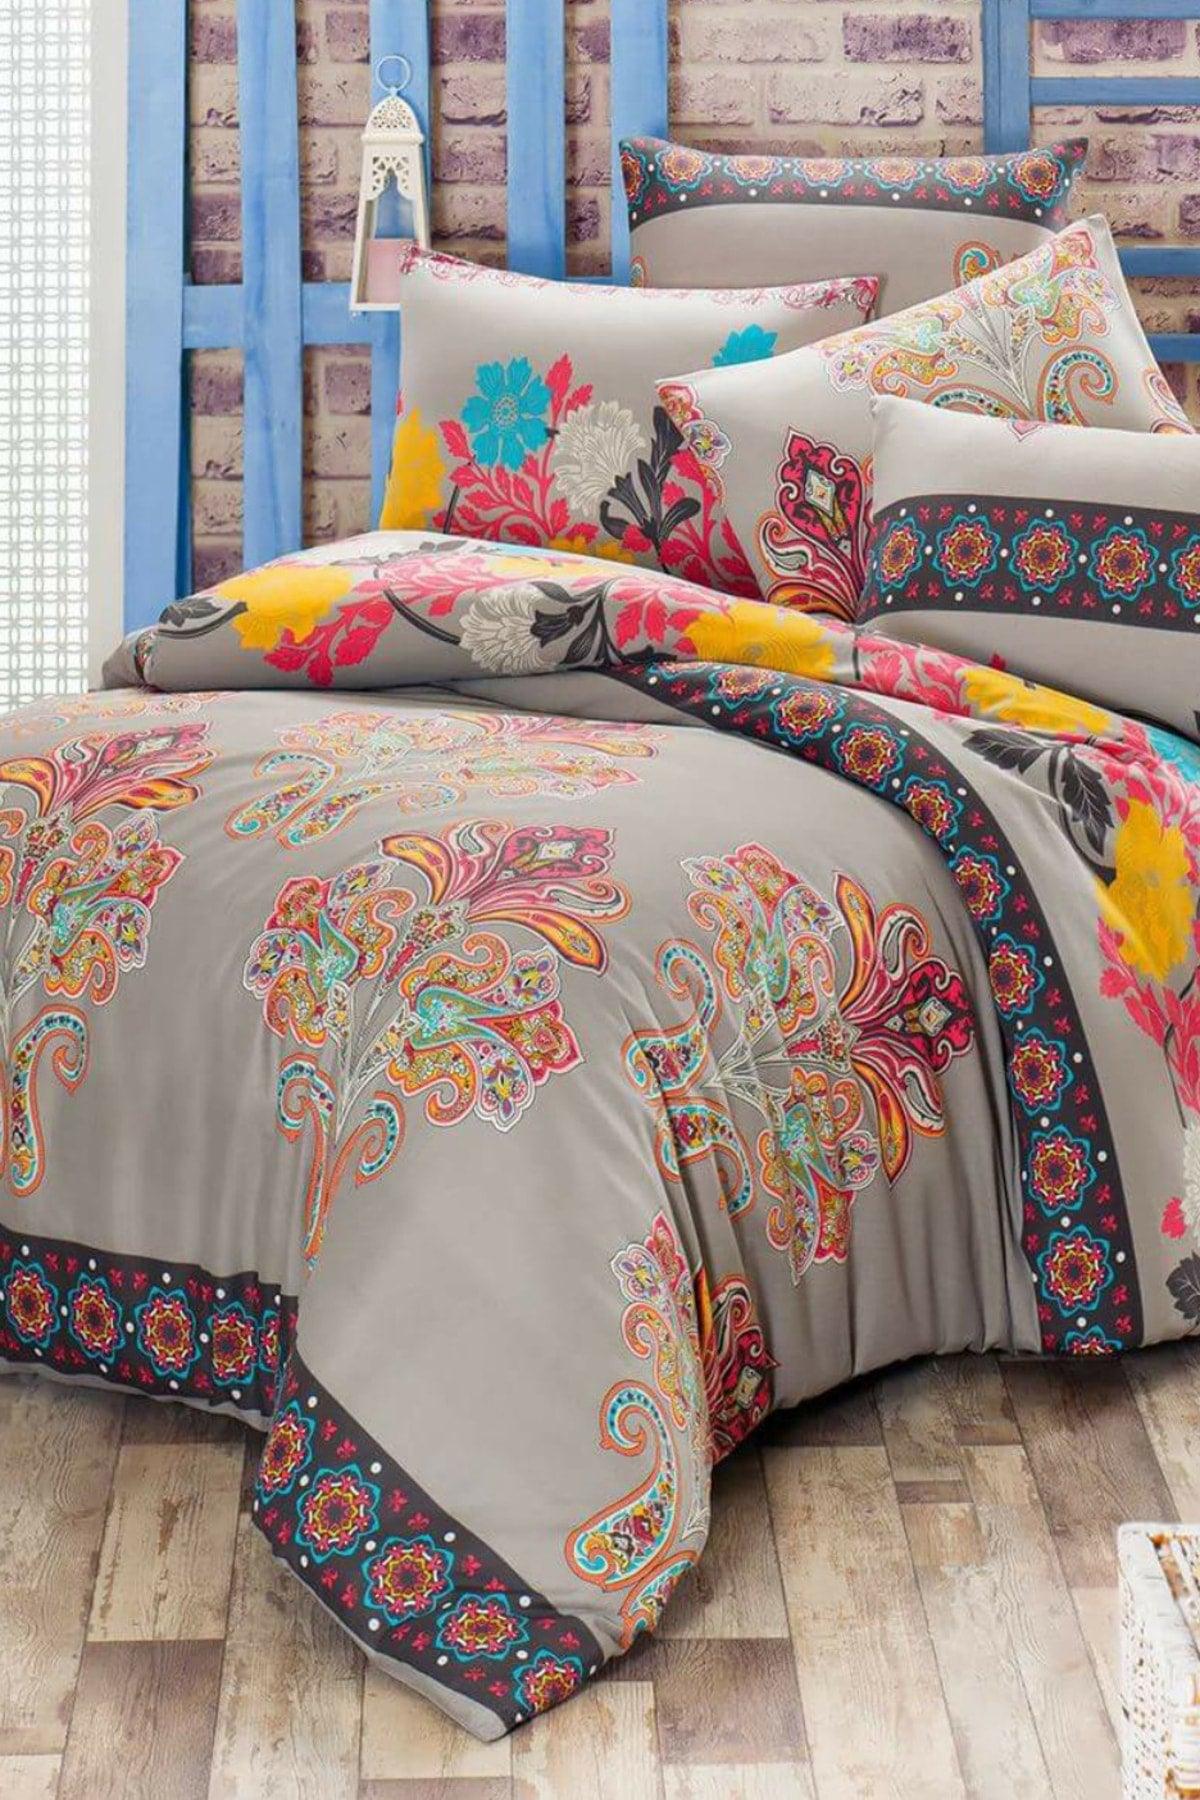 Double Sided Double Duvet Cover Set With Elastic Sheet - Swordslife